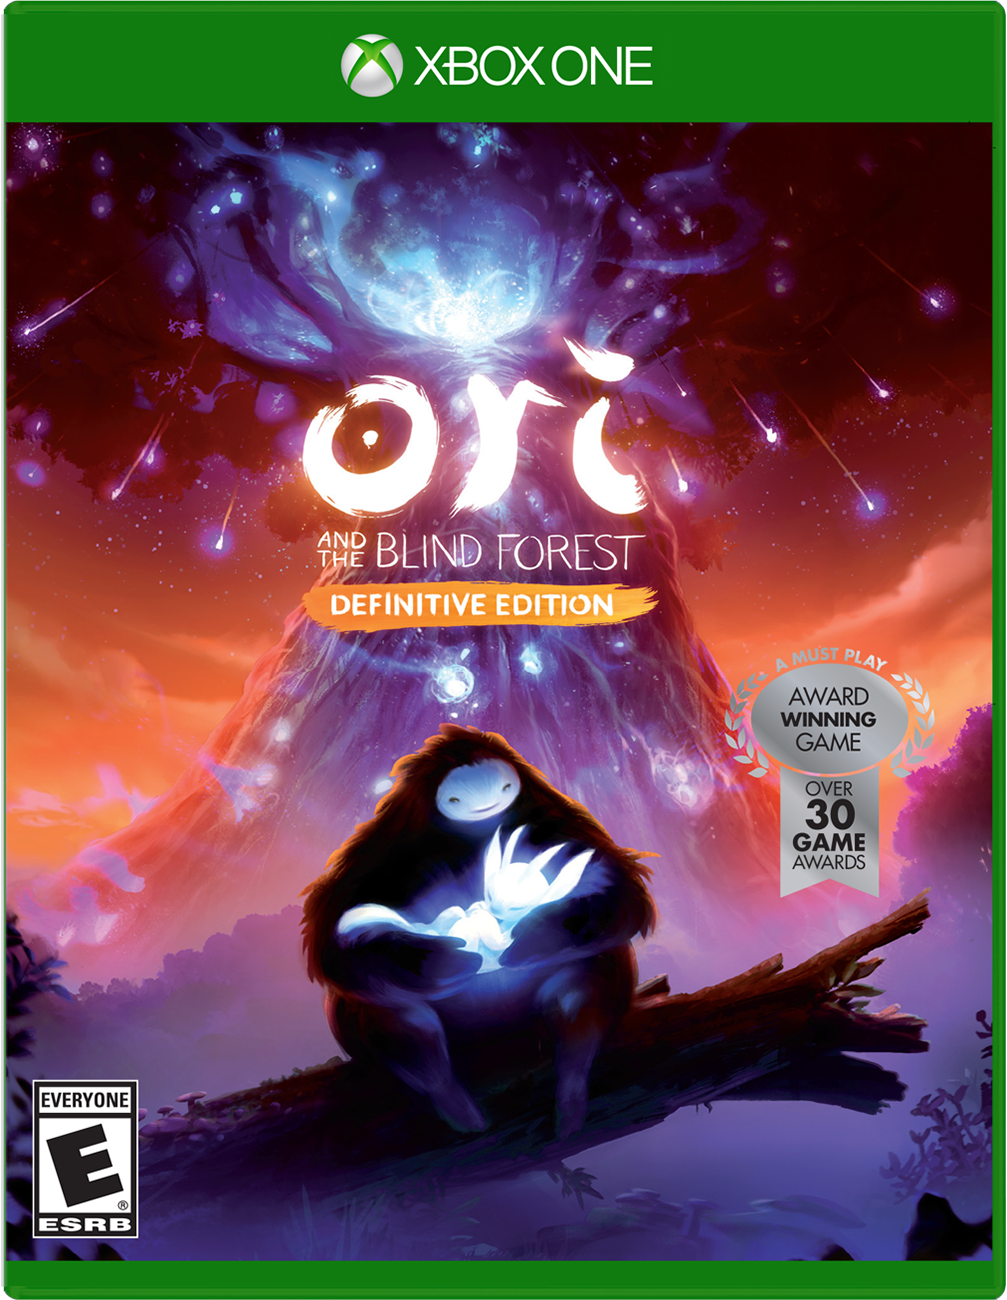 Xbox Achievements are broken for Ori and the Blind Forest on Nintendo Switch  